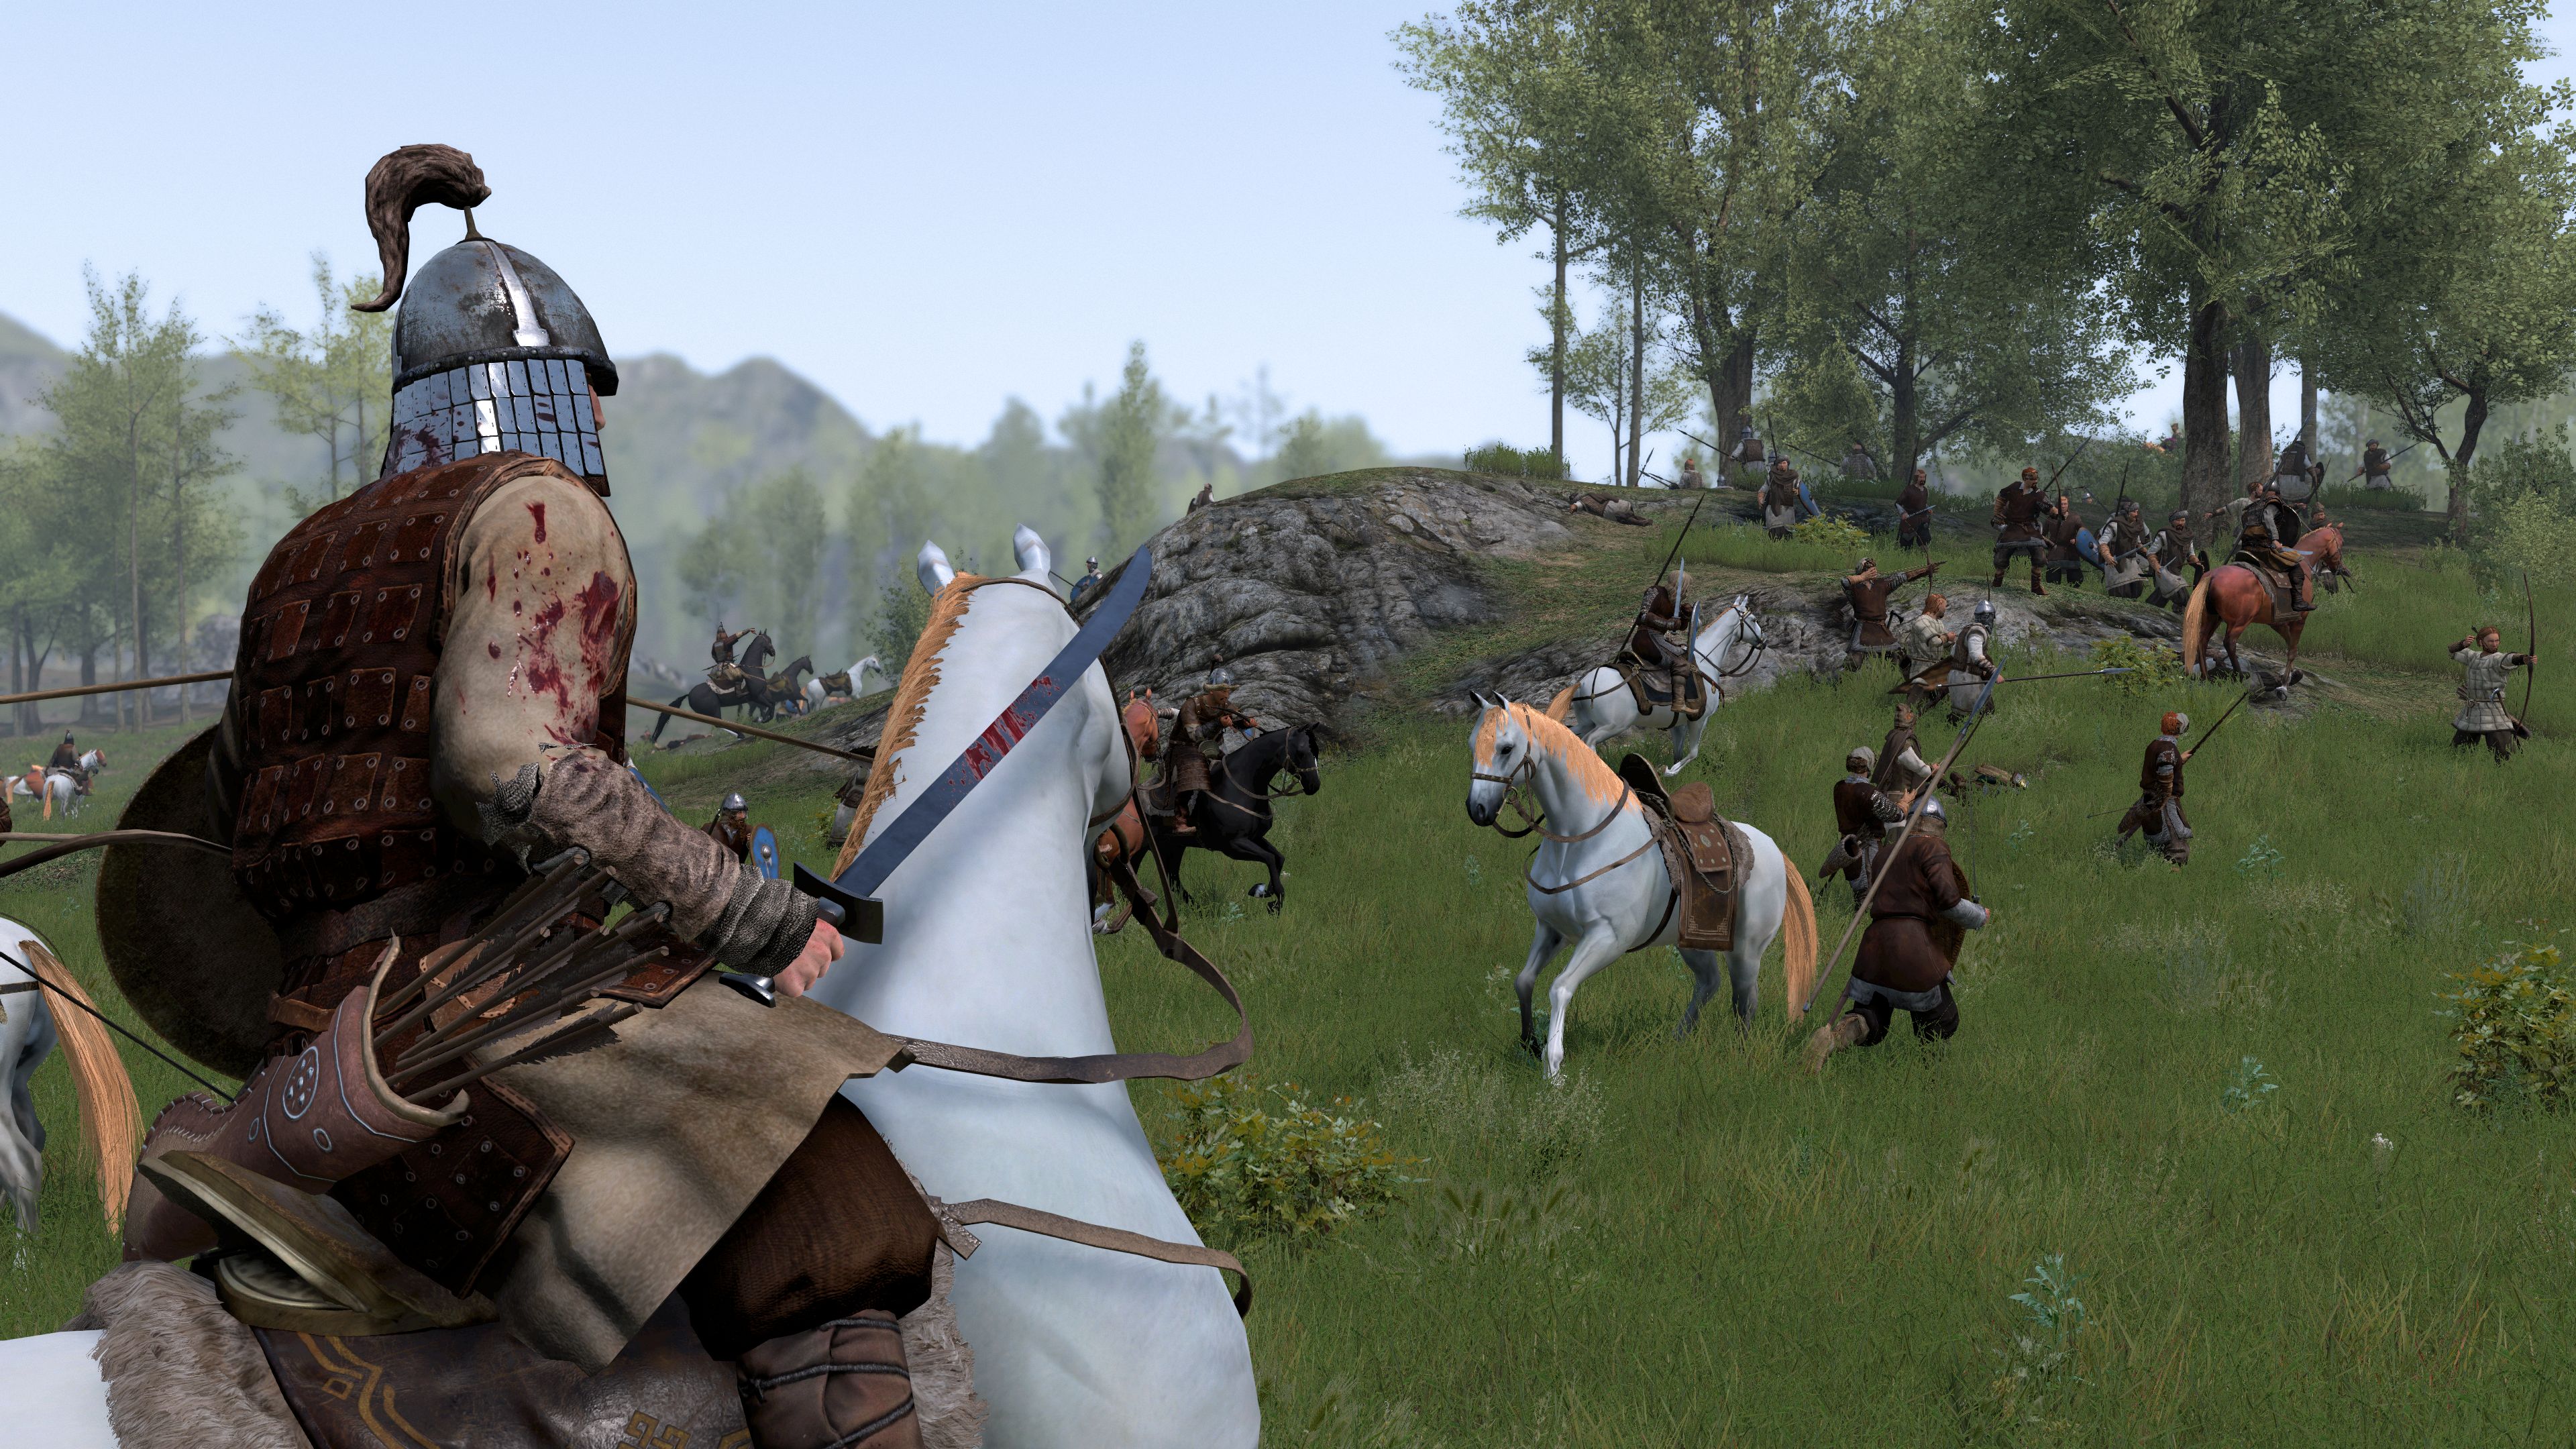 mount and blade bannerlord console mod